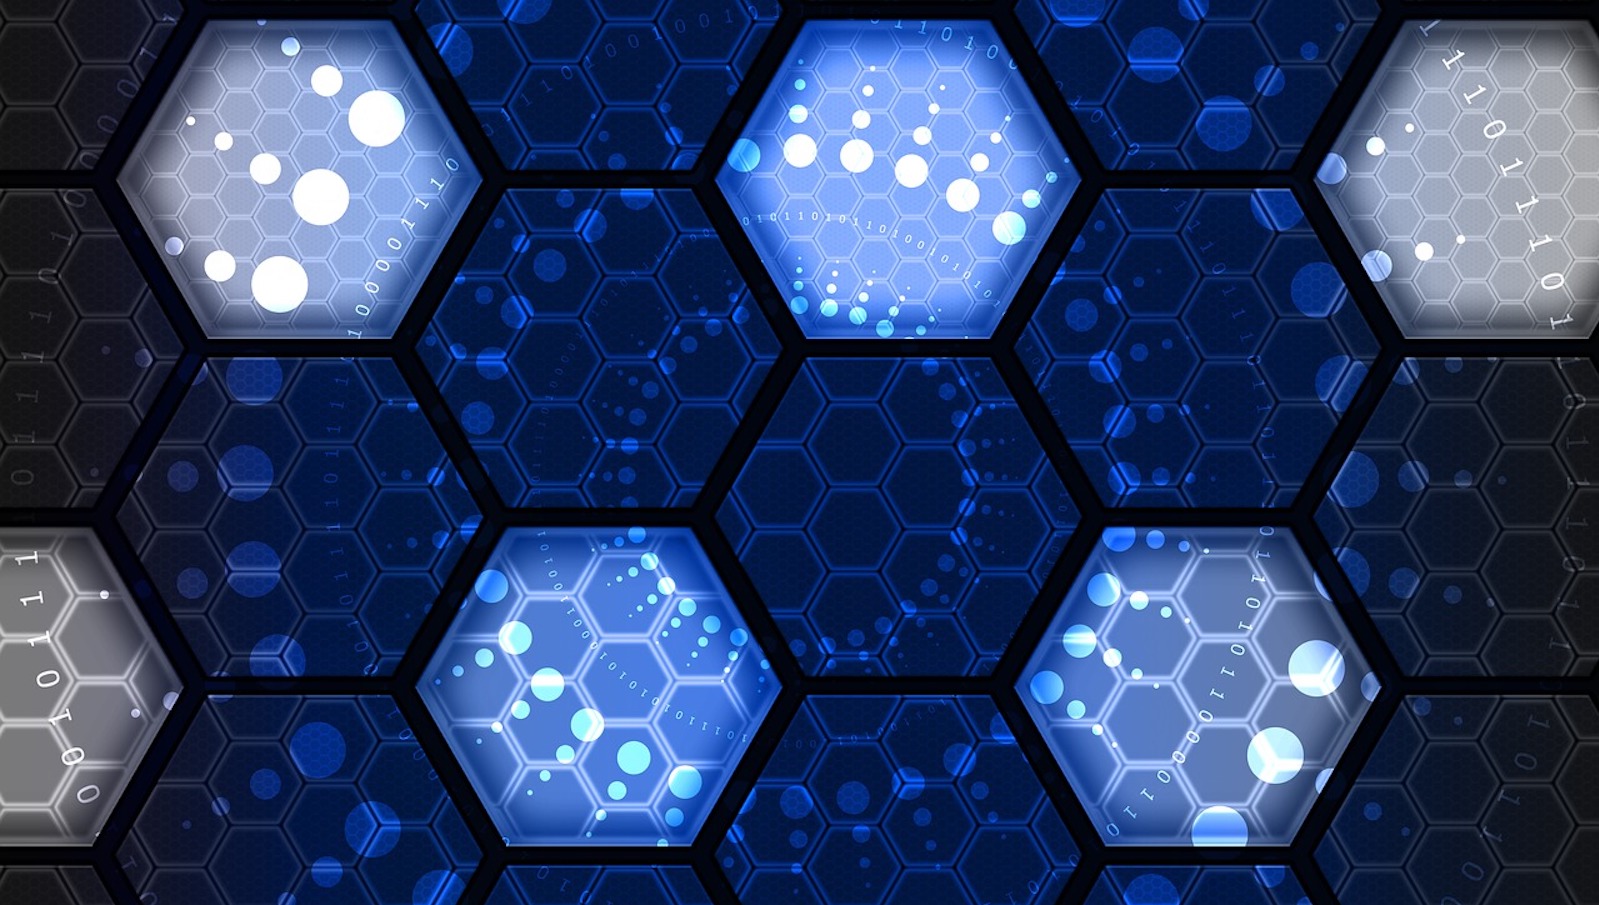 Dark blue and light blue small honeycombs in large honeycombs representing digital and technology